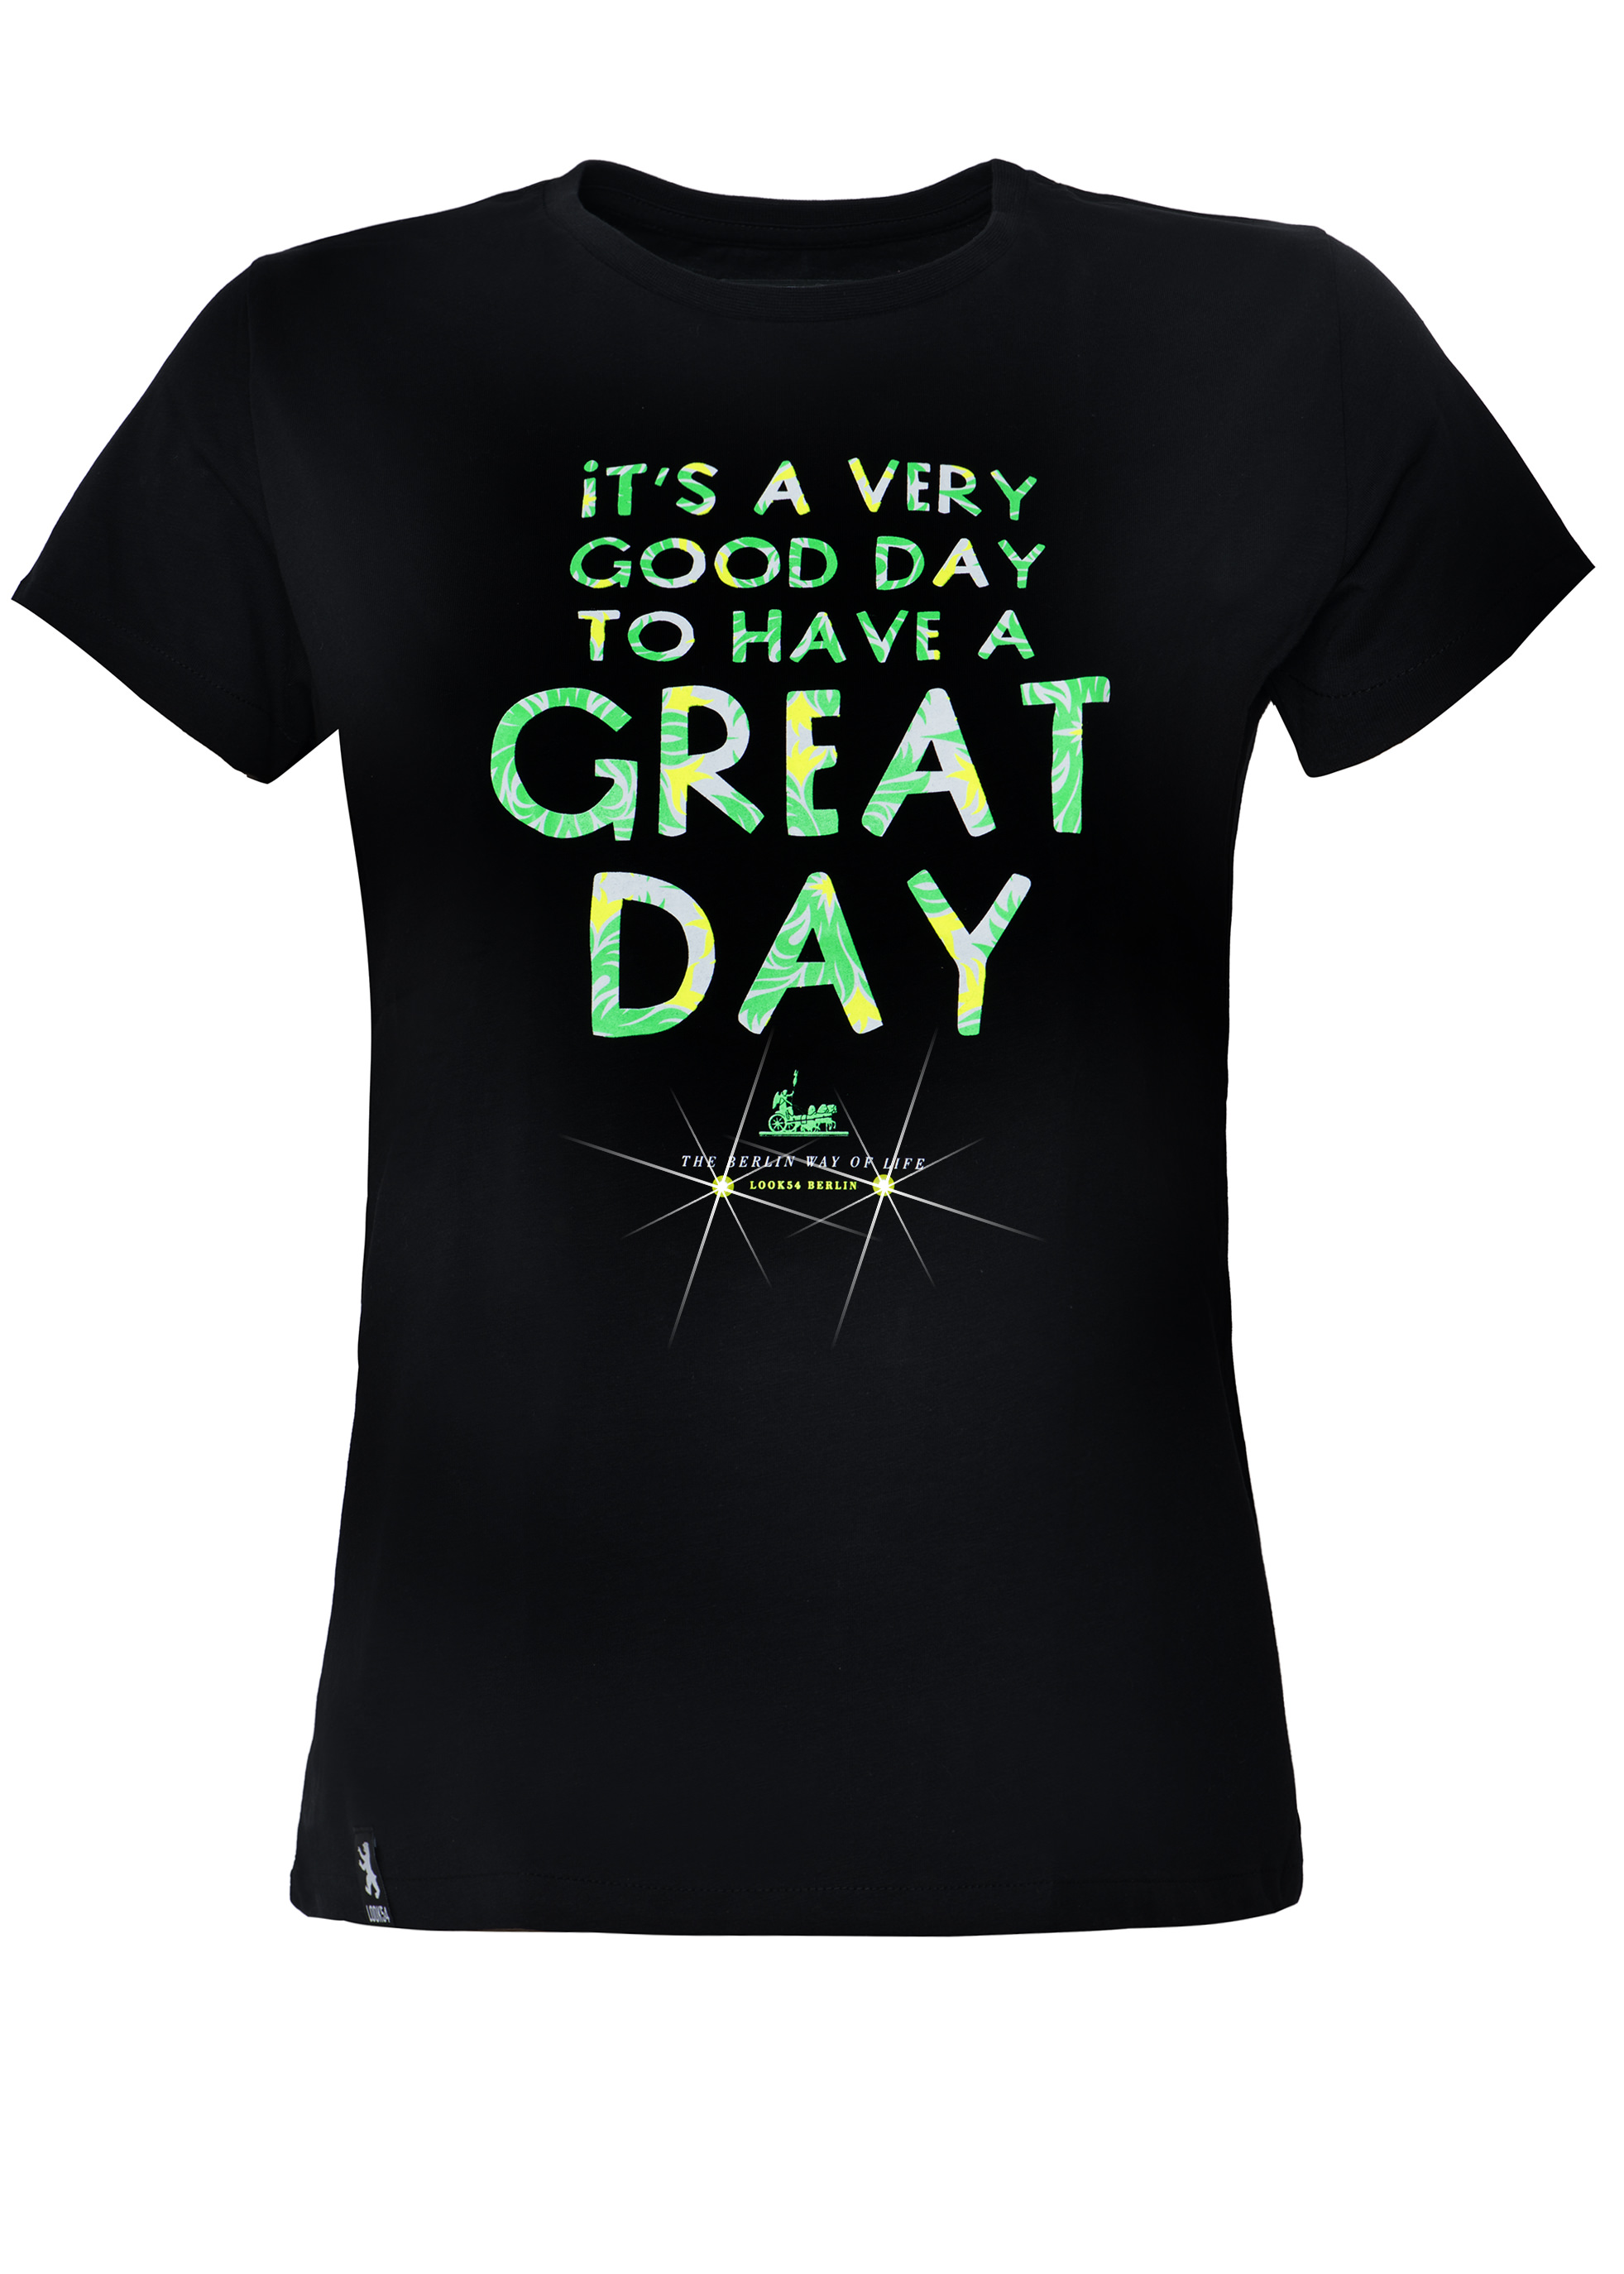 It's a great day Shirt